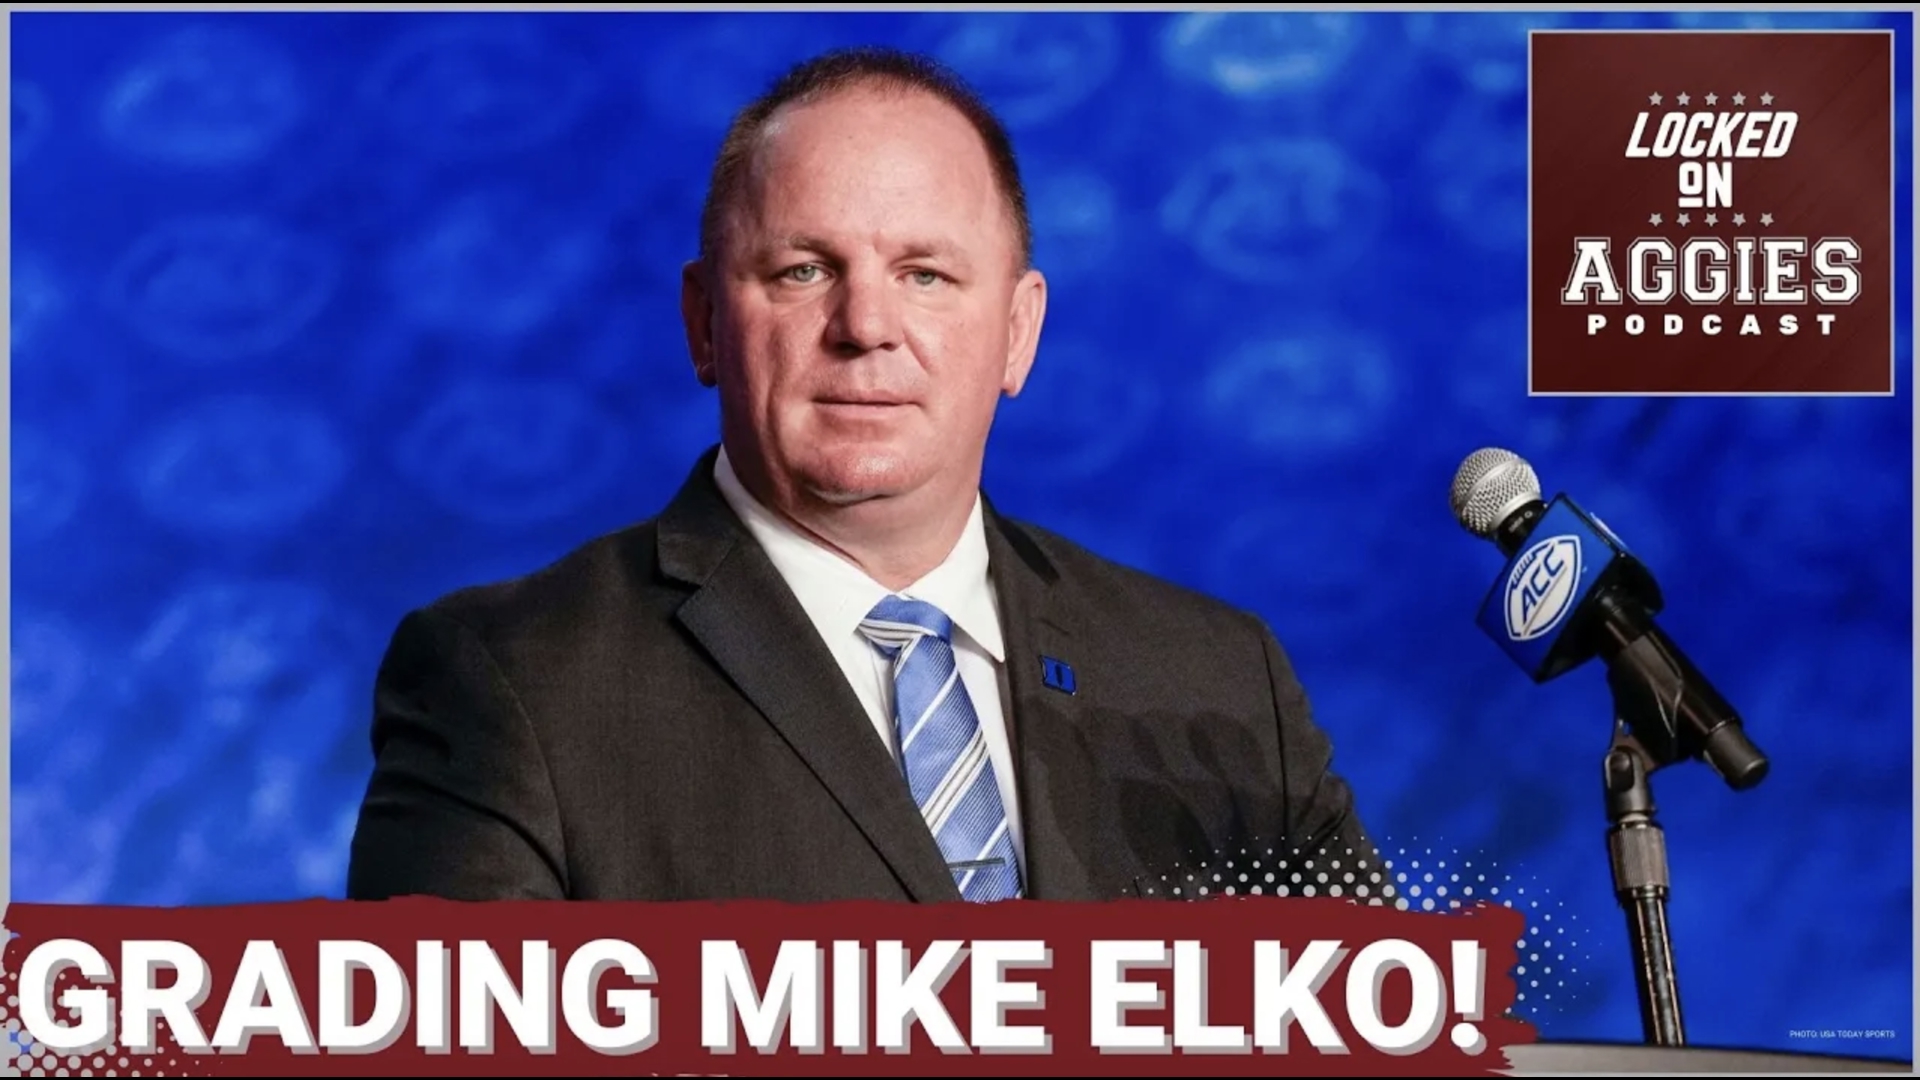 On today's episode of Locked On Aggies, host Andrew Stefaniak graded the job Texas A&M's new head football coach, Mike Elko, has done since taking over